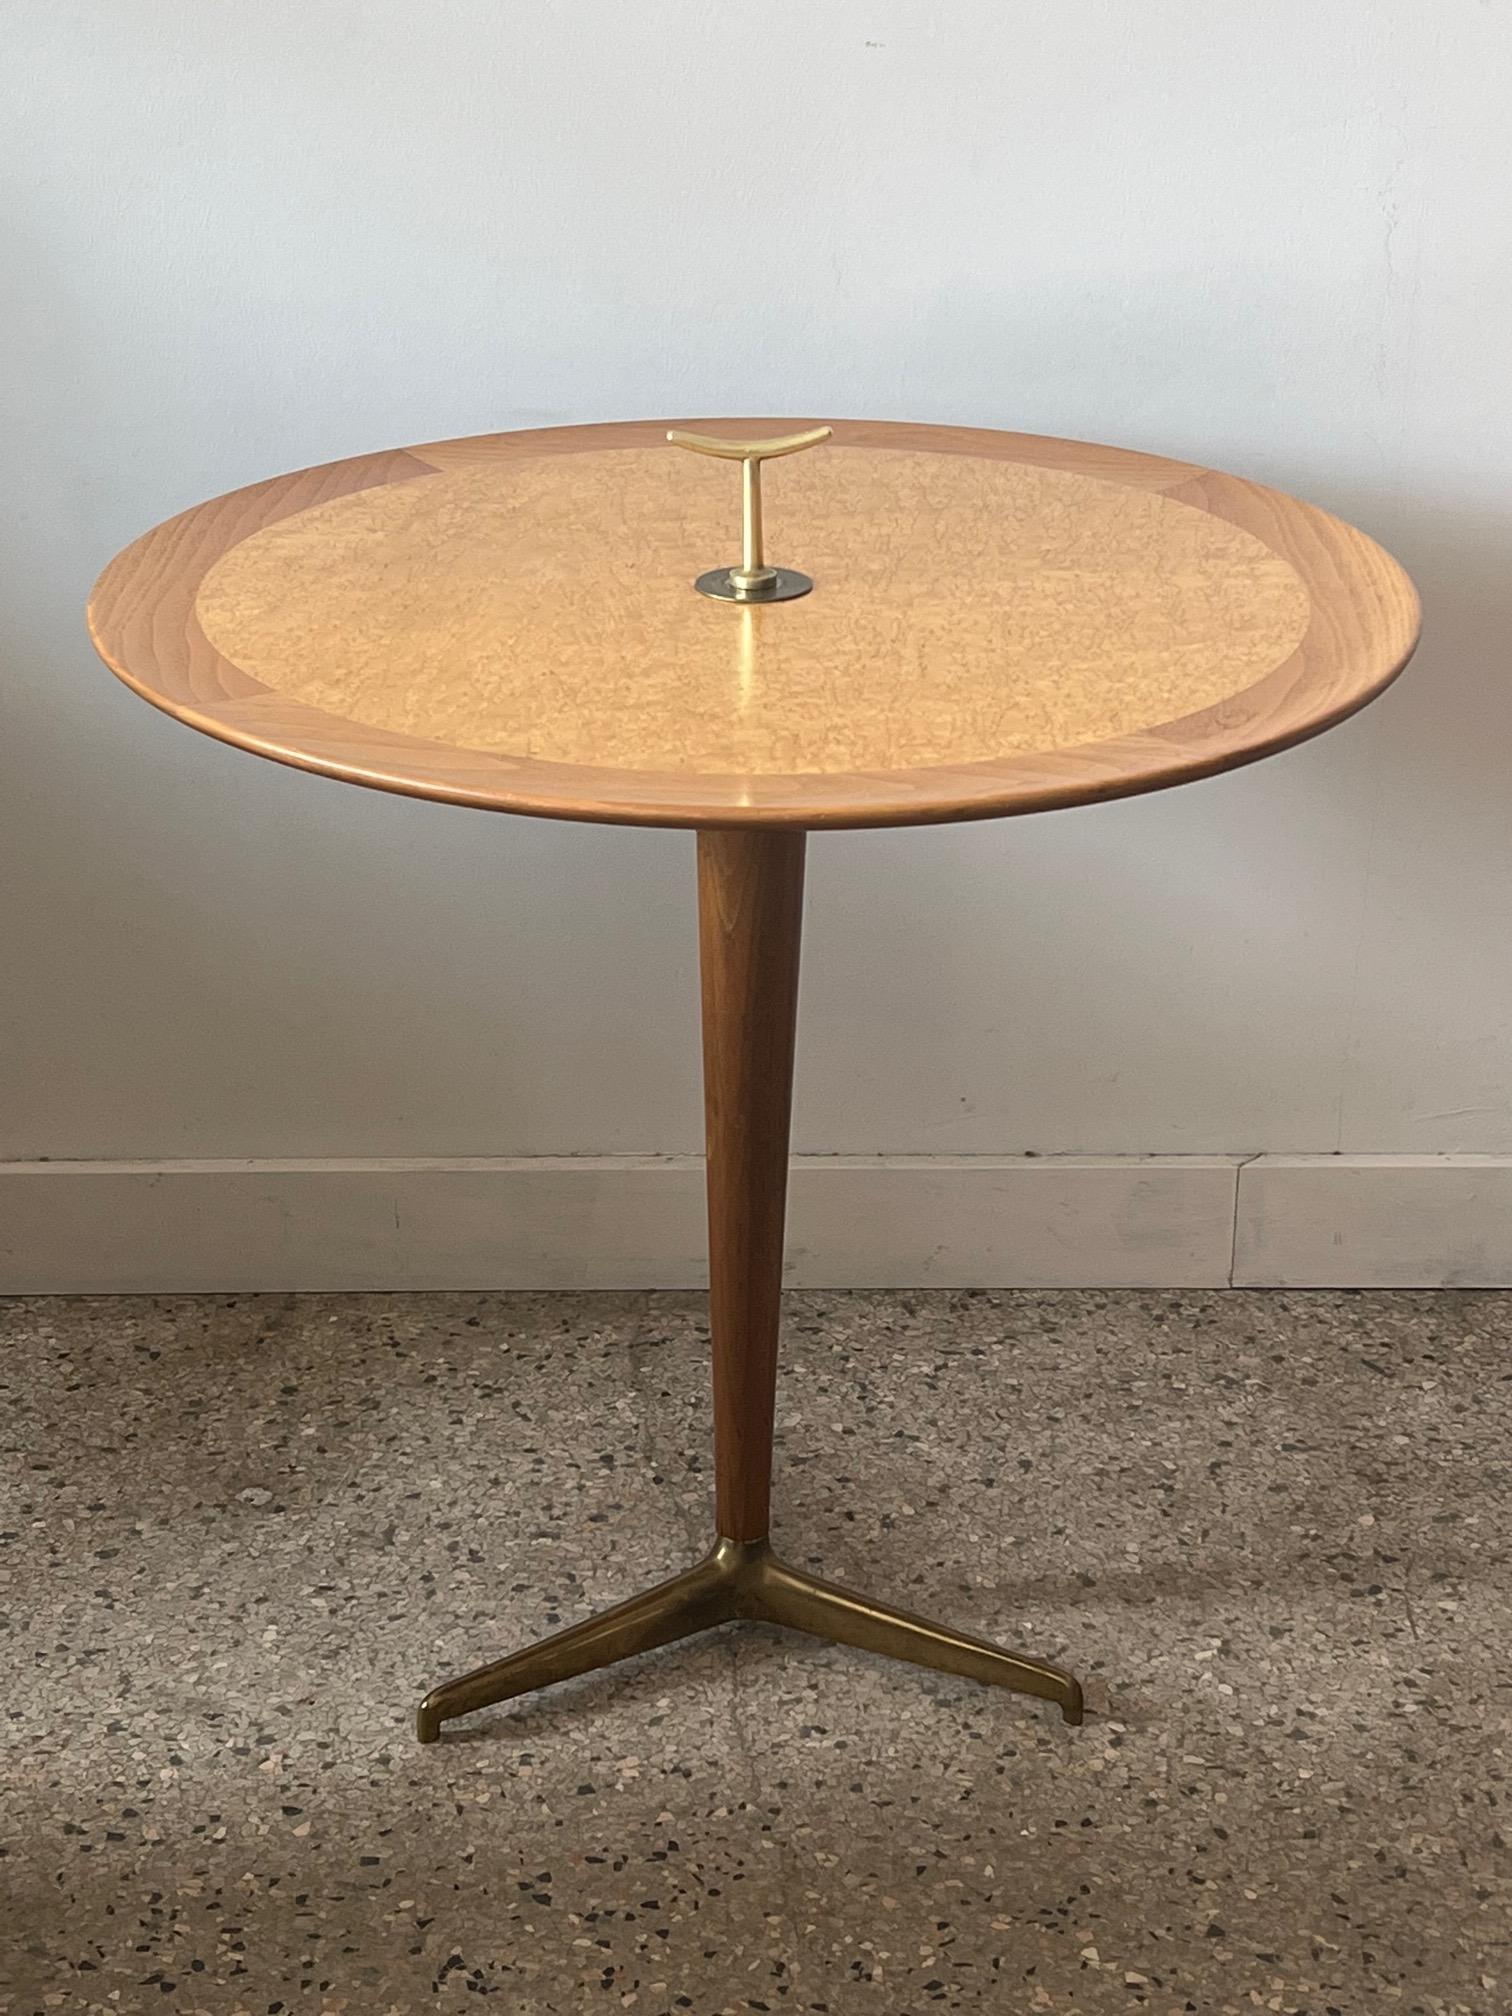 A classic and hard to find Edward Wormley for Dunbar snack table. Solid brass tripod base, Karelian birch top with typical finial.